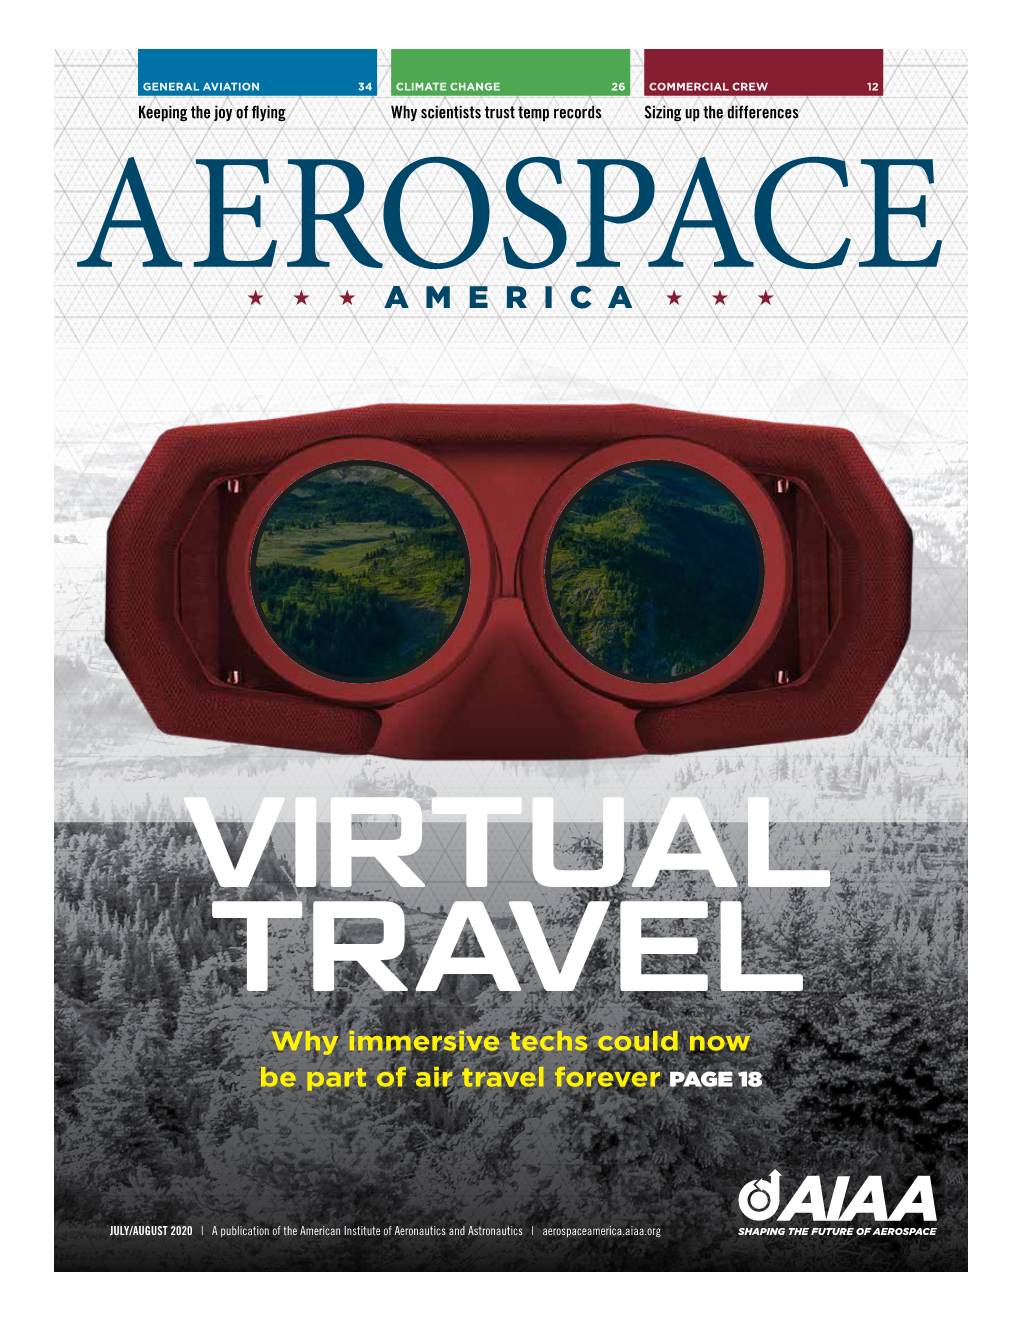 Why Immersive Techs Could Now Be Part of Air Travel Forever PAGE 18